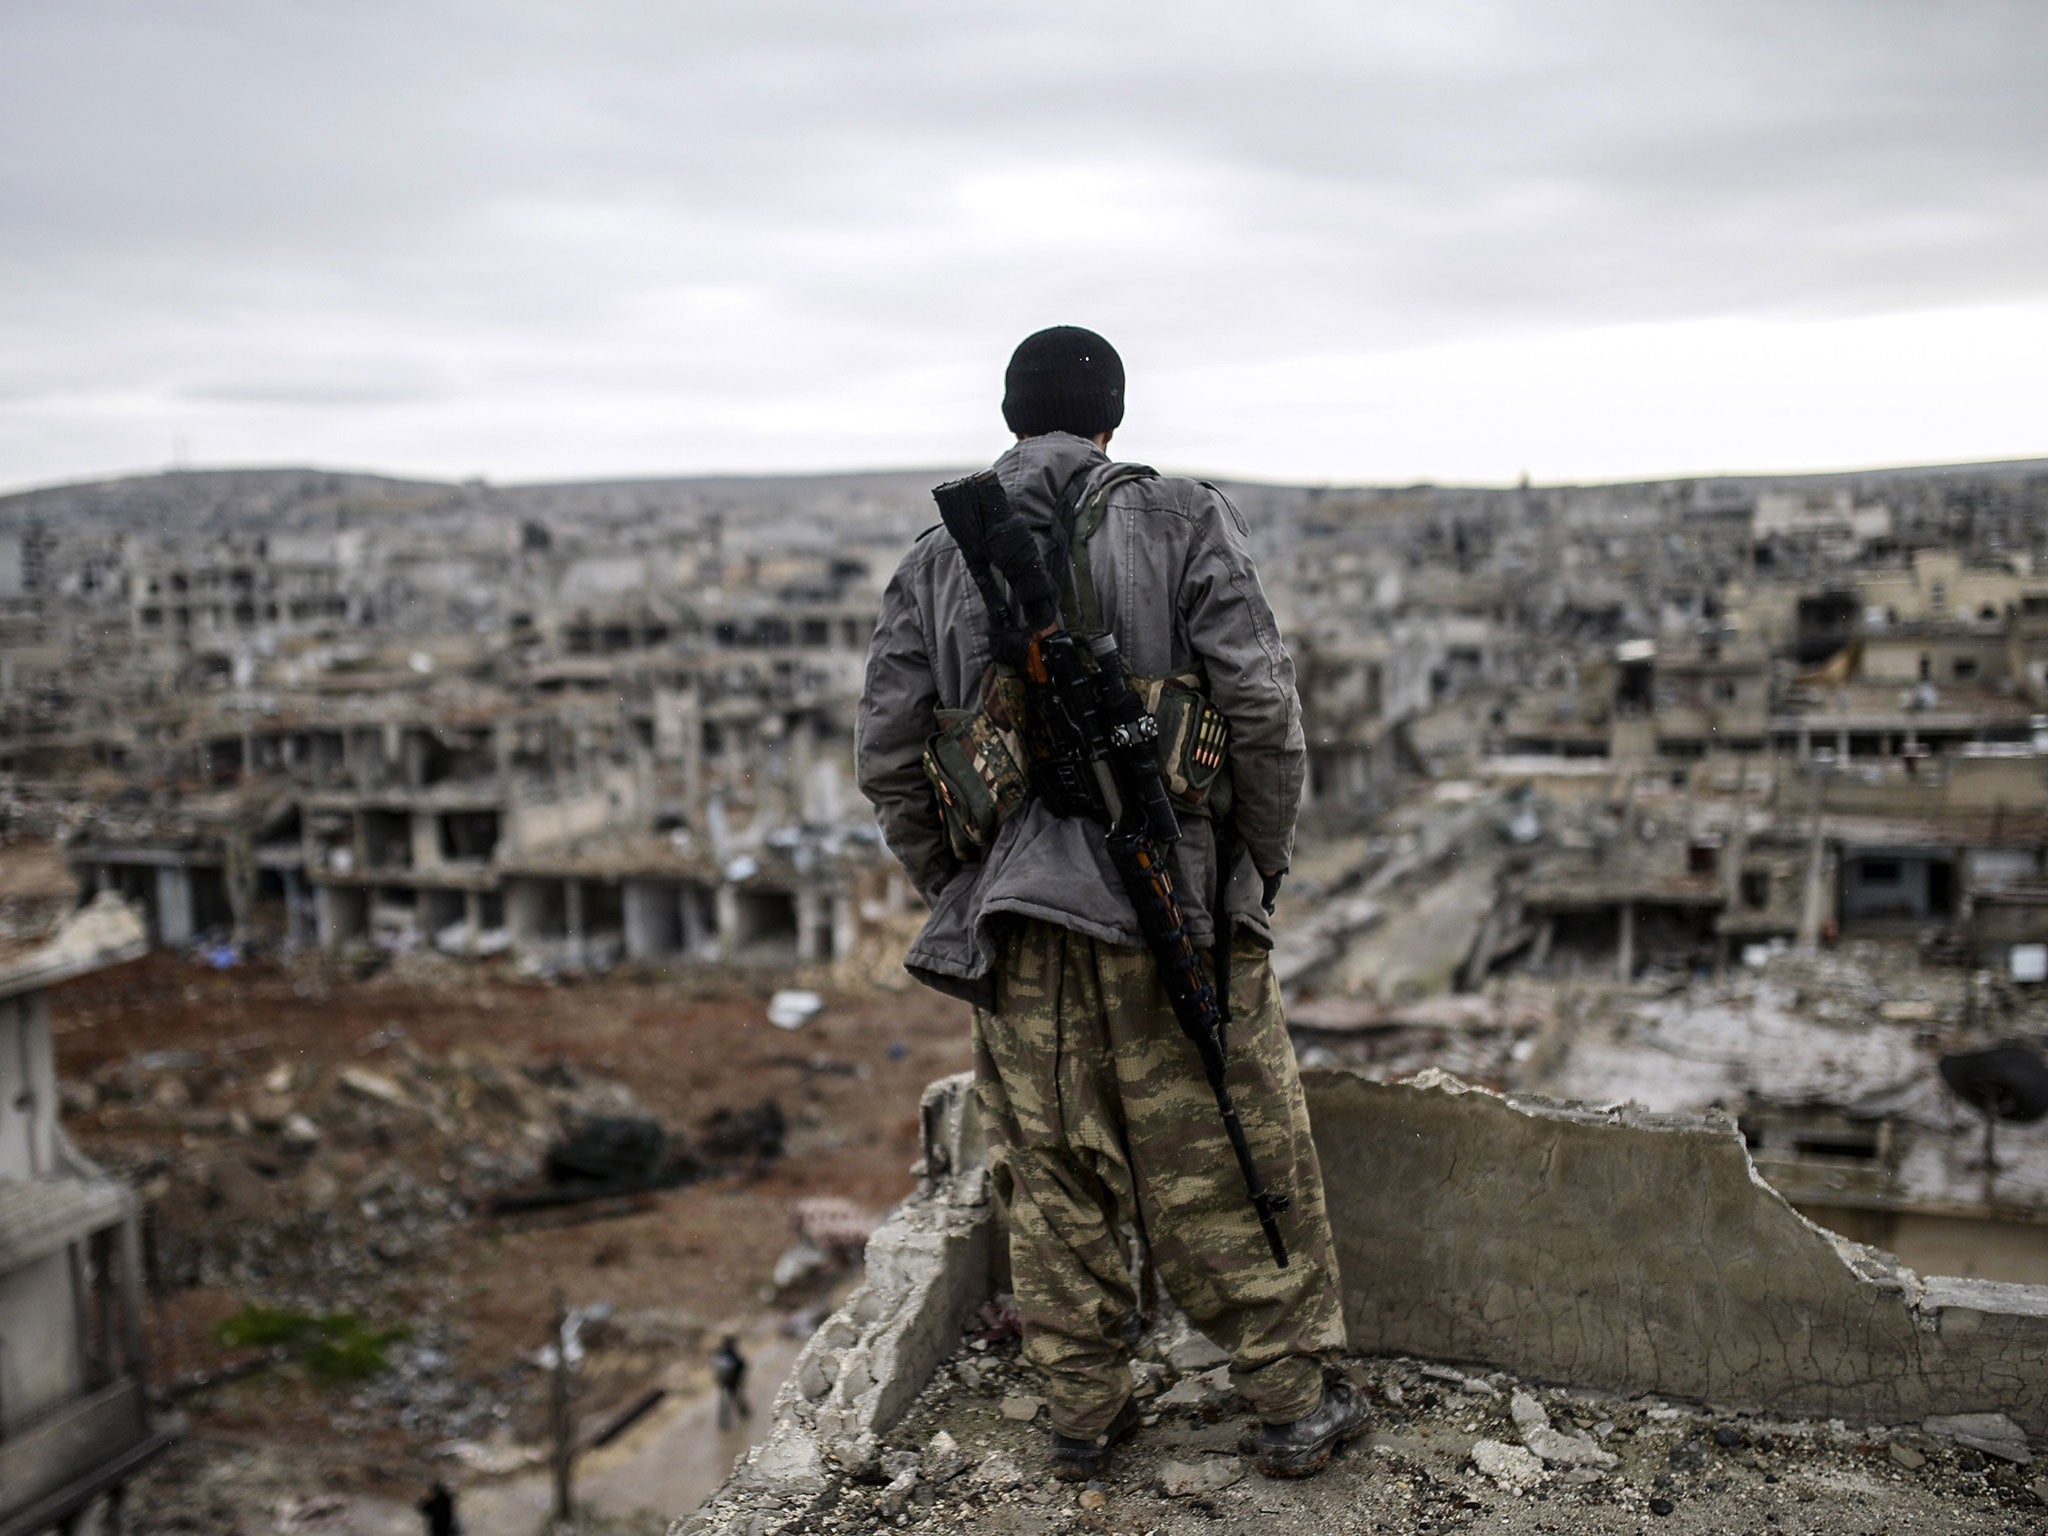 Musa, a 25-year-old Kurdish marksman, stands atop a building as he looks at the destroyed Syrian town of Kobane